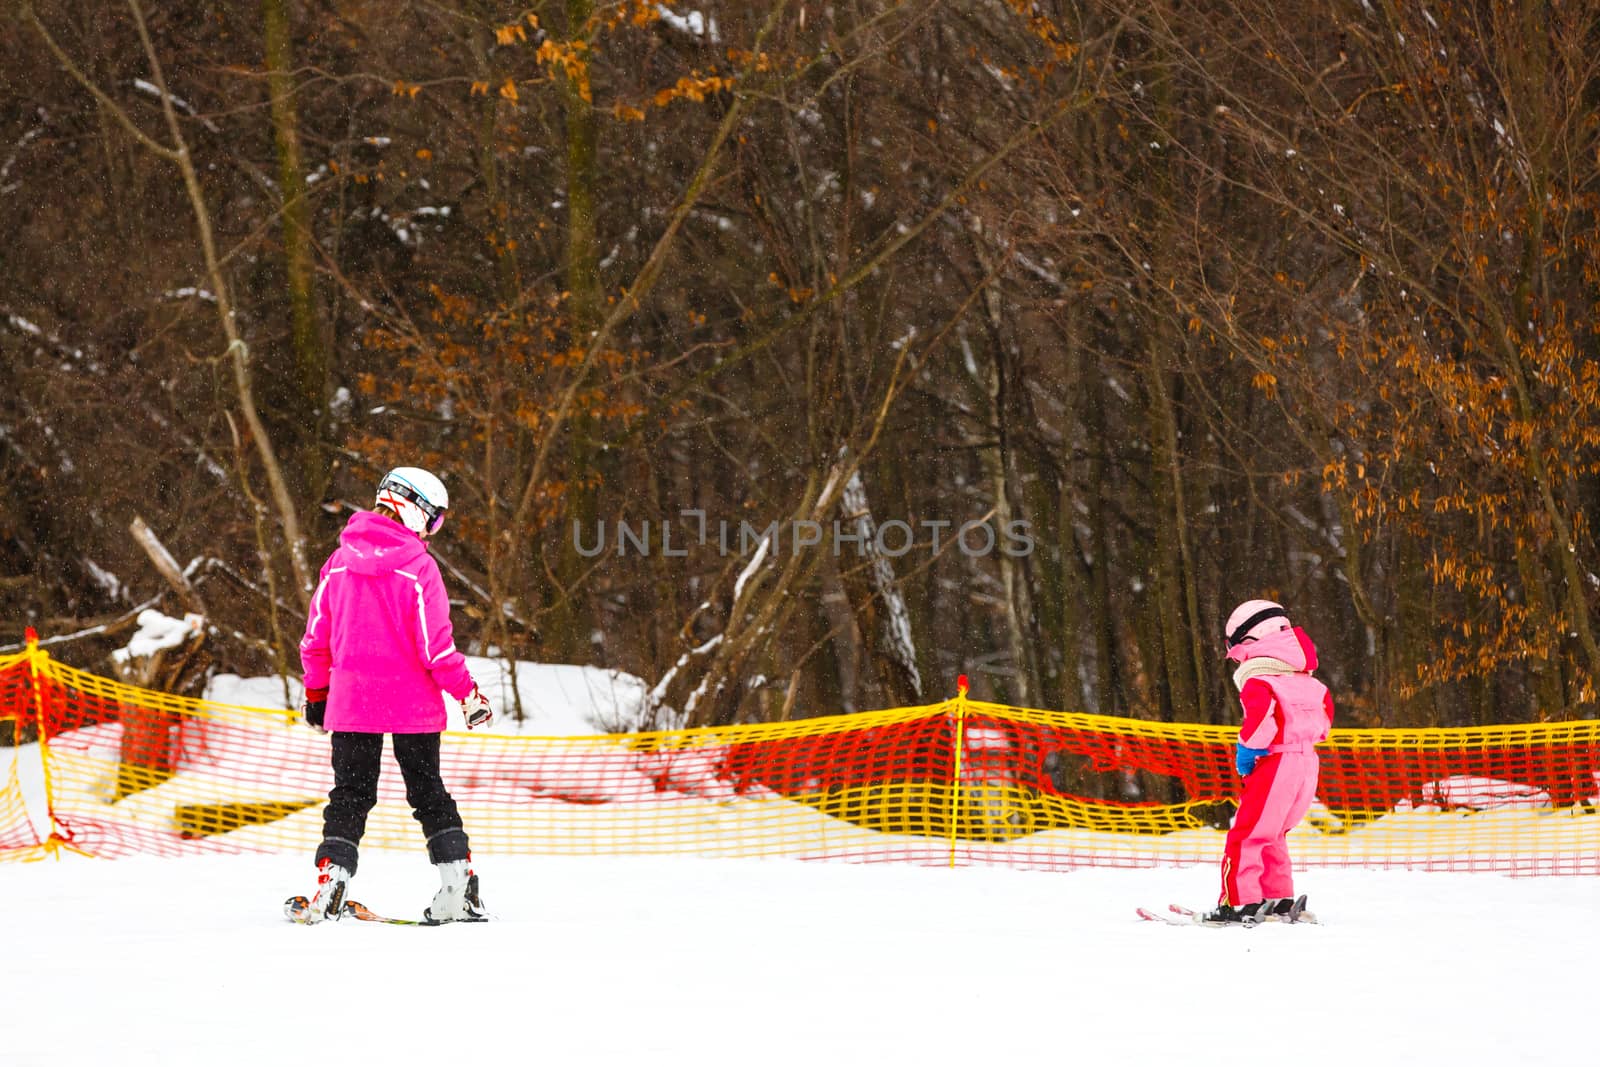 Ski lesson, little girl skiing with an instructor by Andelov13